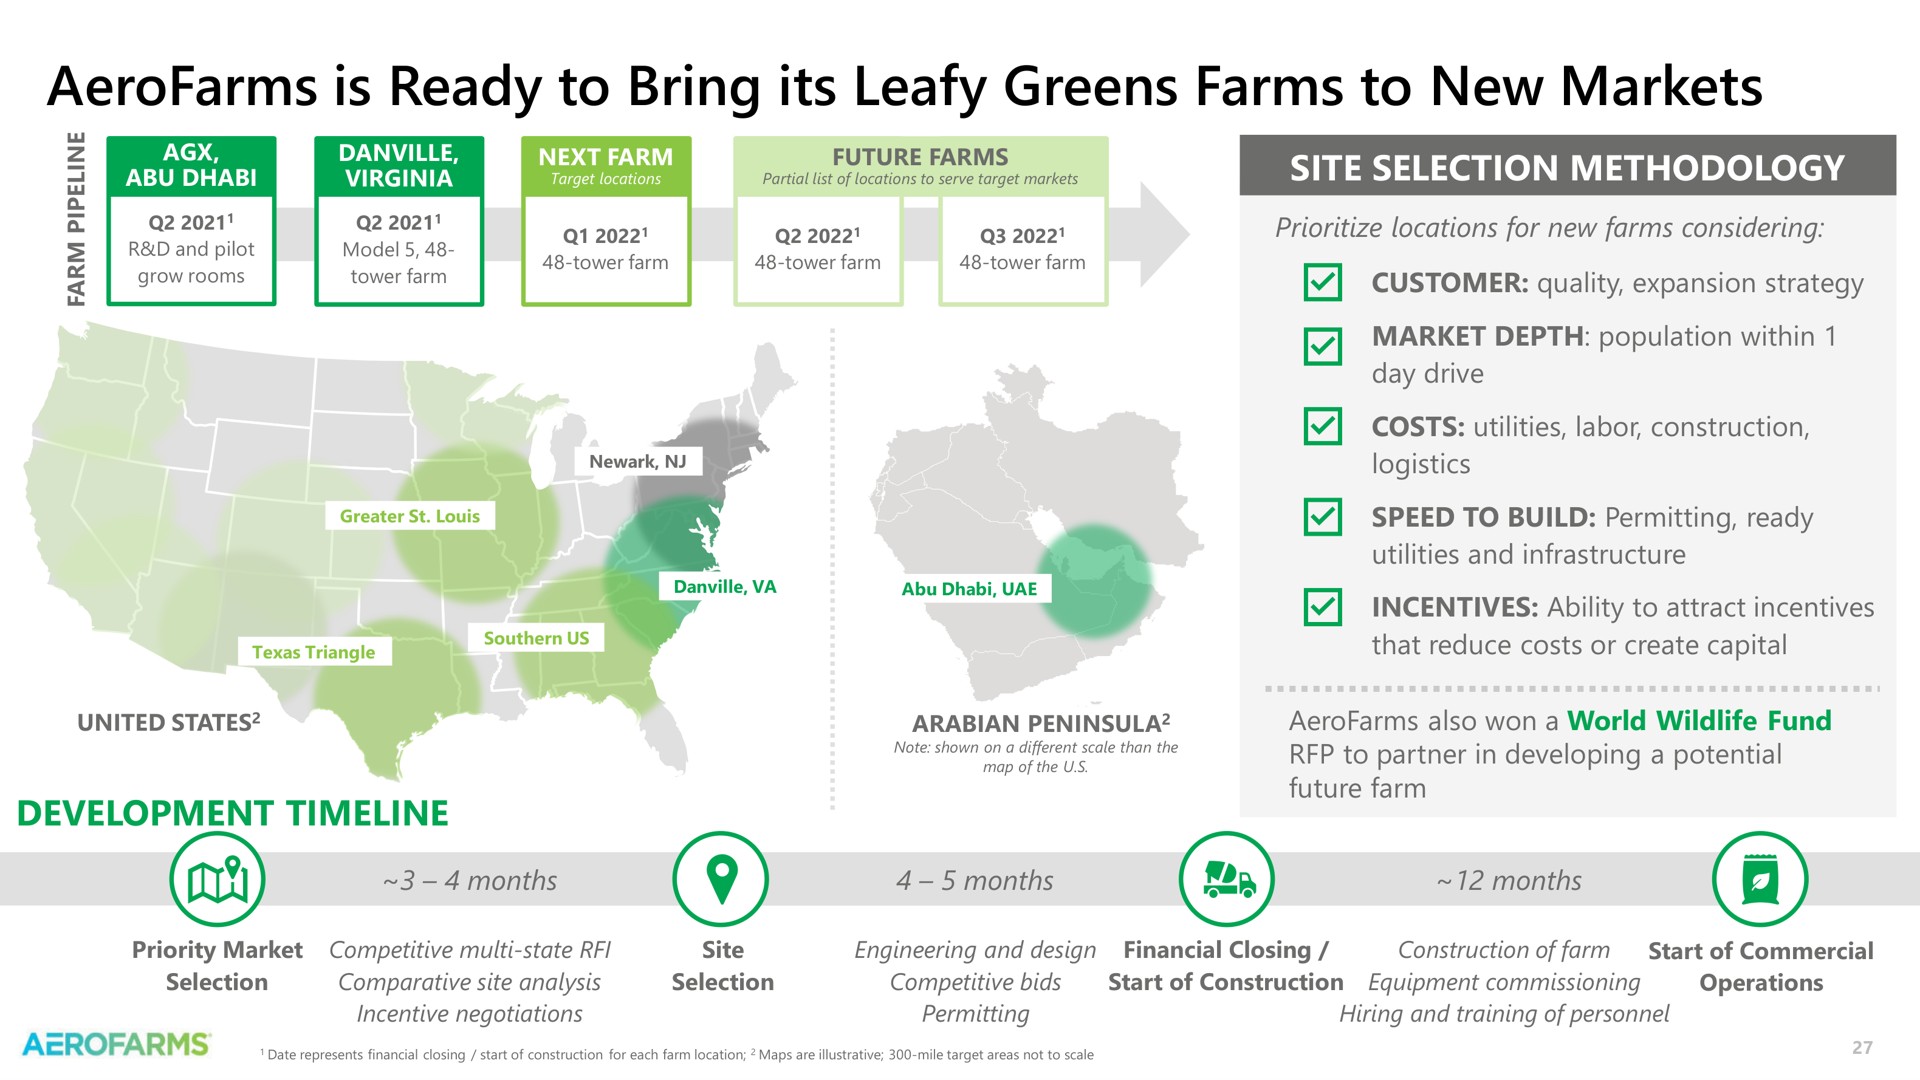 is ready to bring its leafy greens farms to new markets | AeroFarms